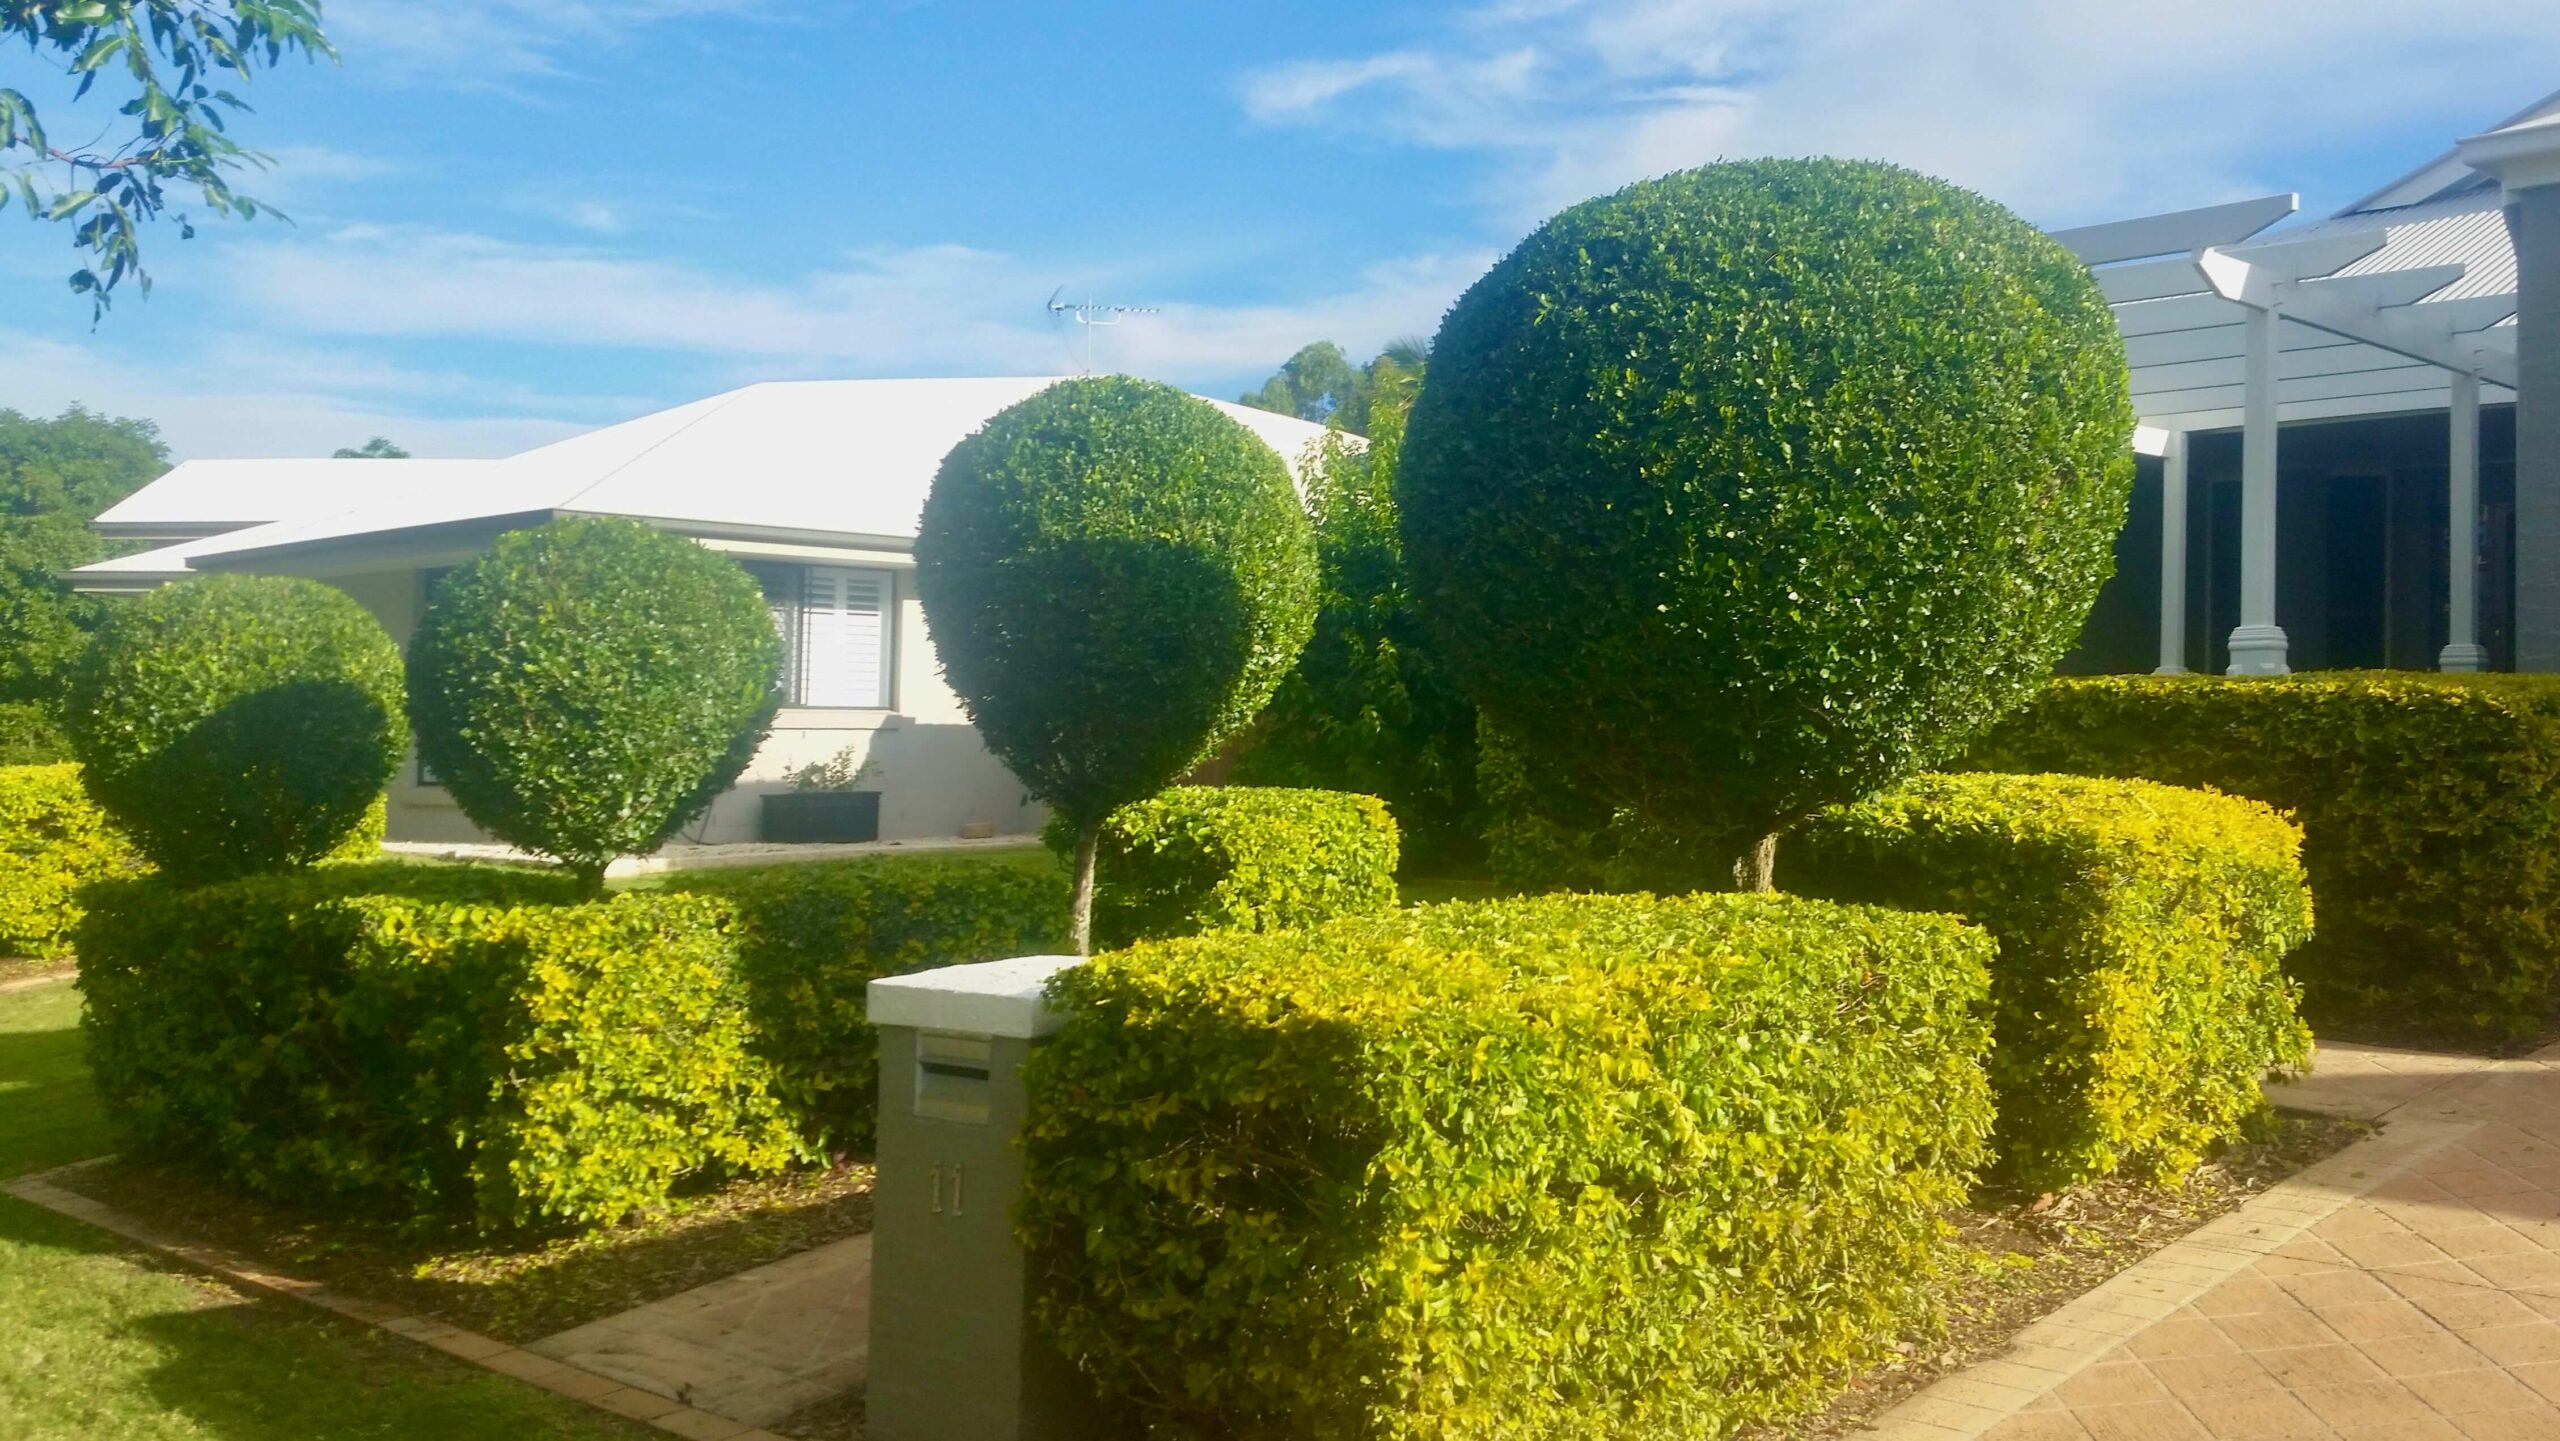 Majestic garden design with pruned trees and hedges elegant and neat design